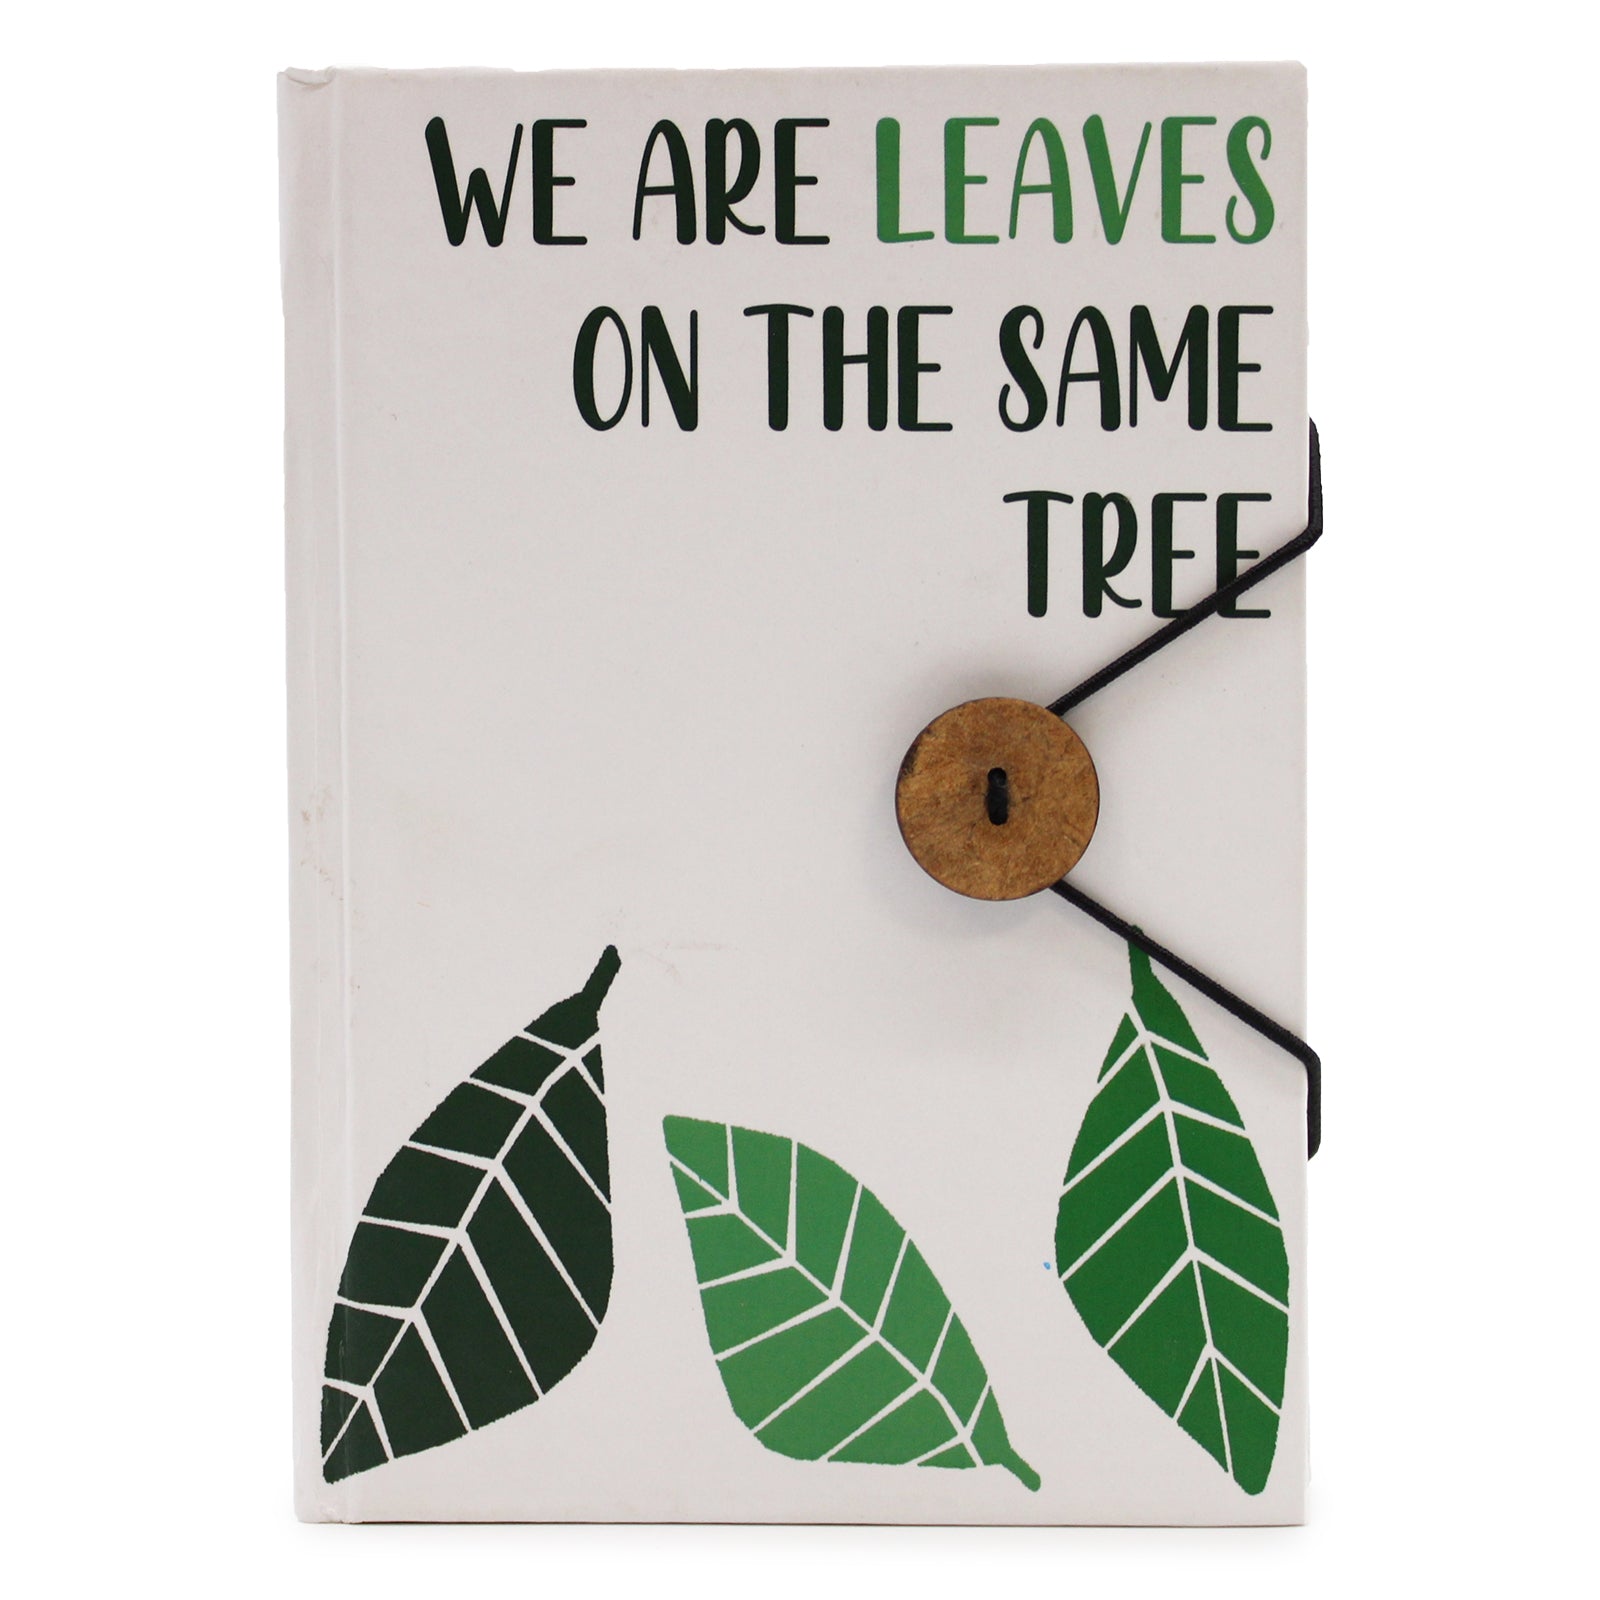 View Notebook with strap Leaves on the same tree information